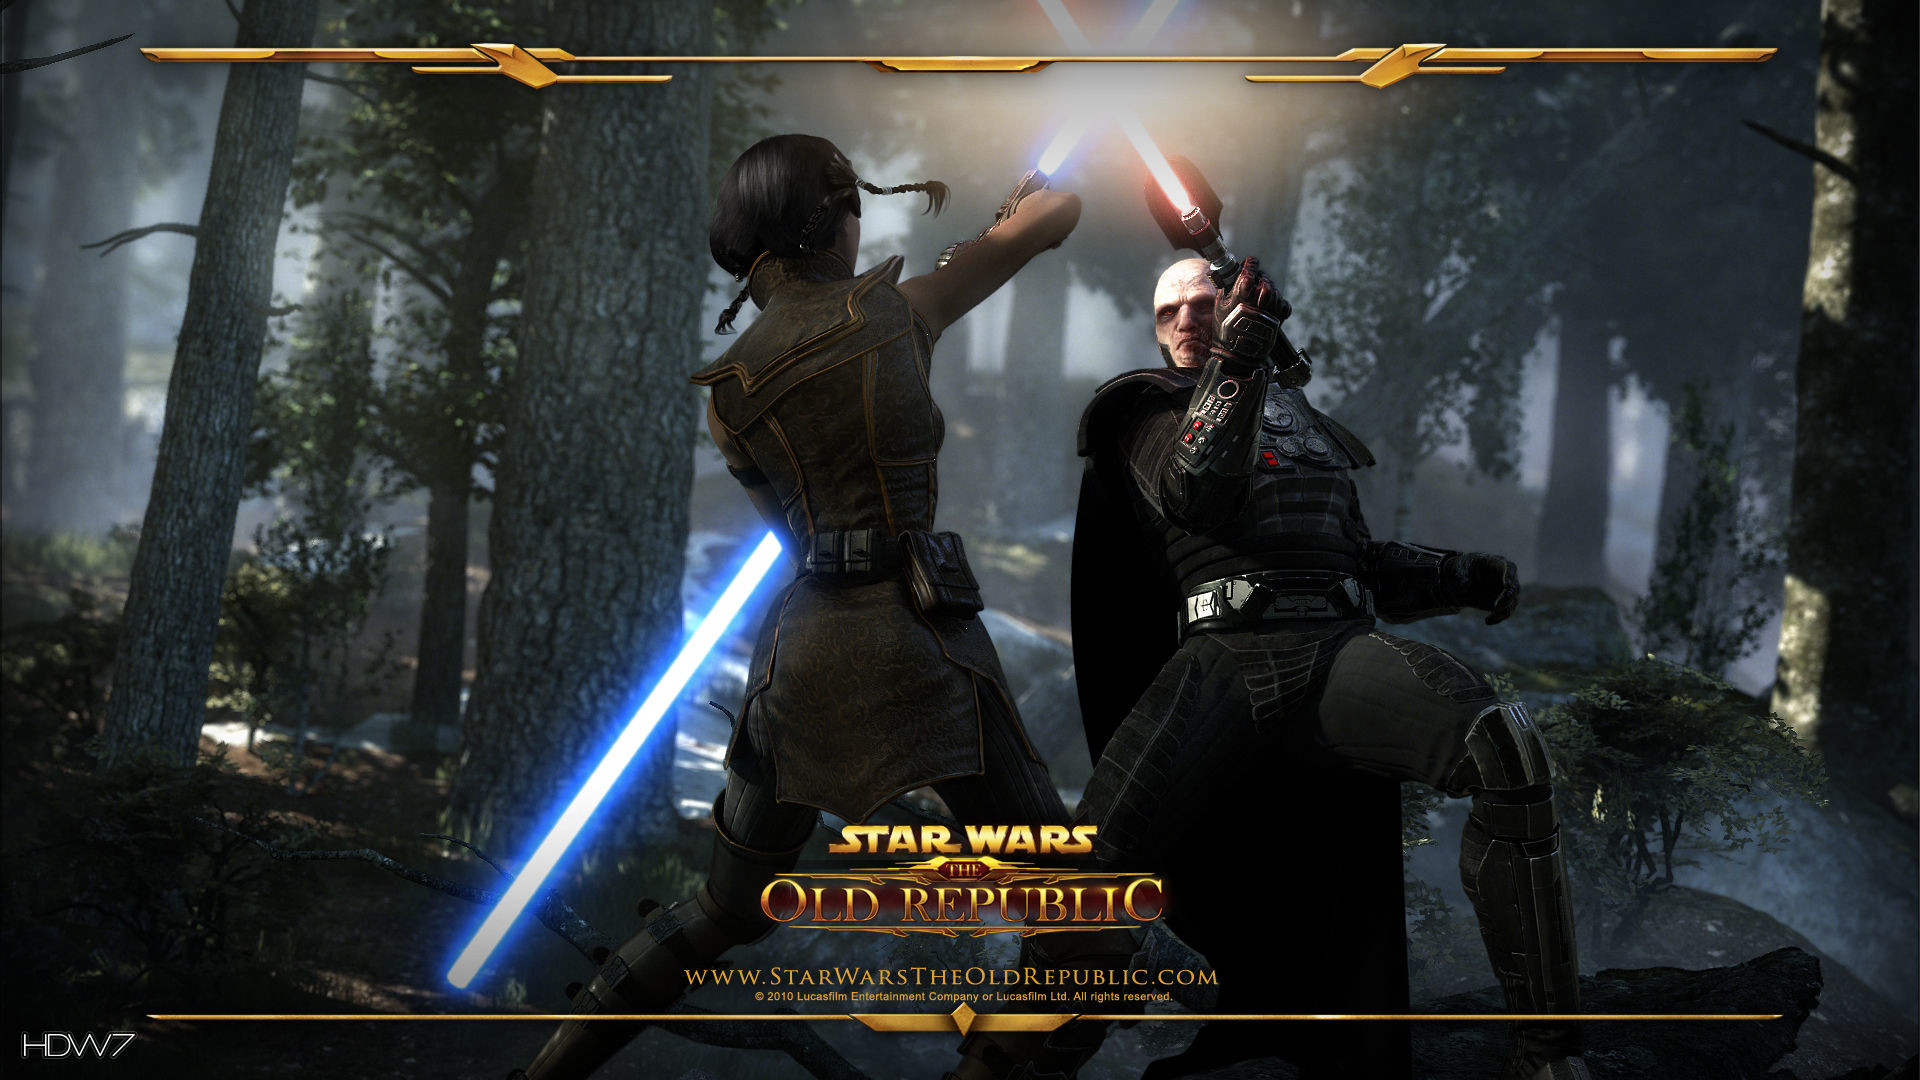 1920x1080 star wars the old republic duel in forest widescreen hd wallpaper